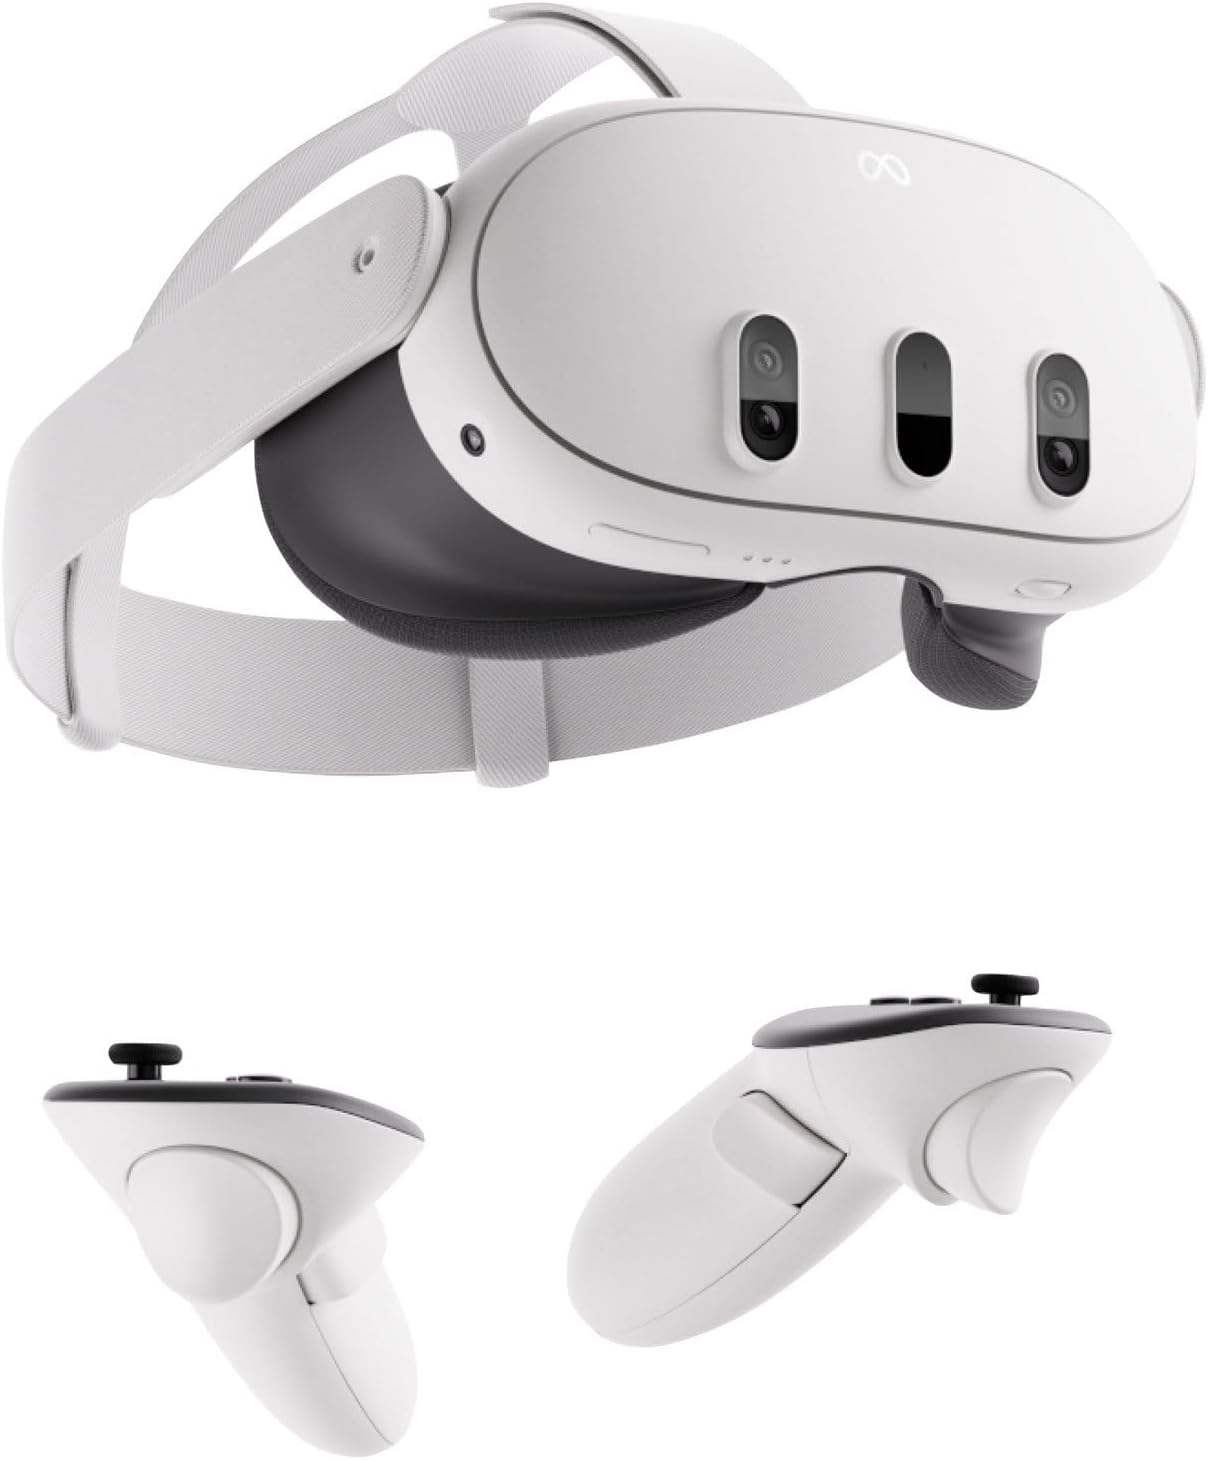 Meta Quest 3 headset and controllers